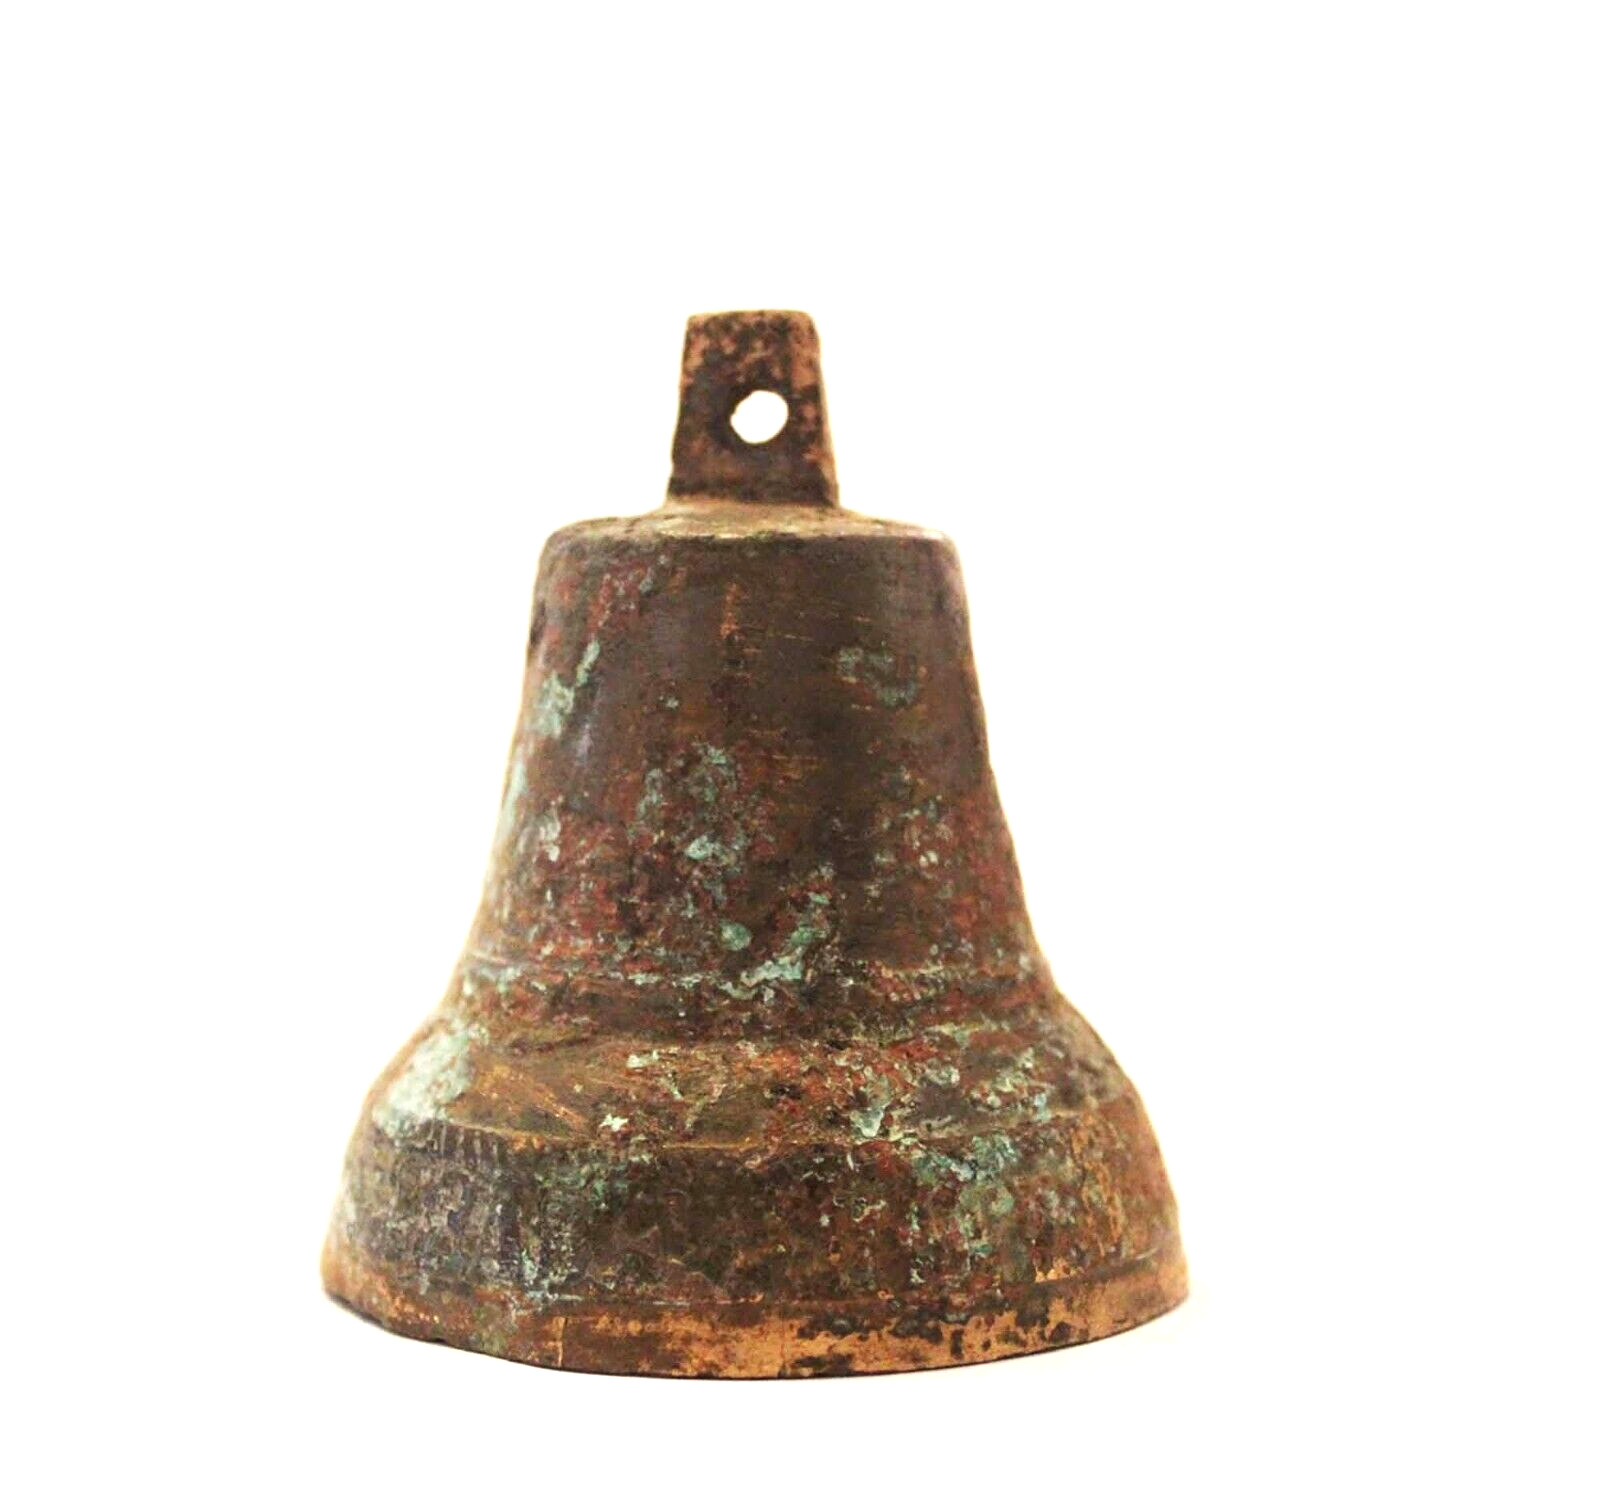 Antique bell from the 19th century